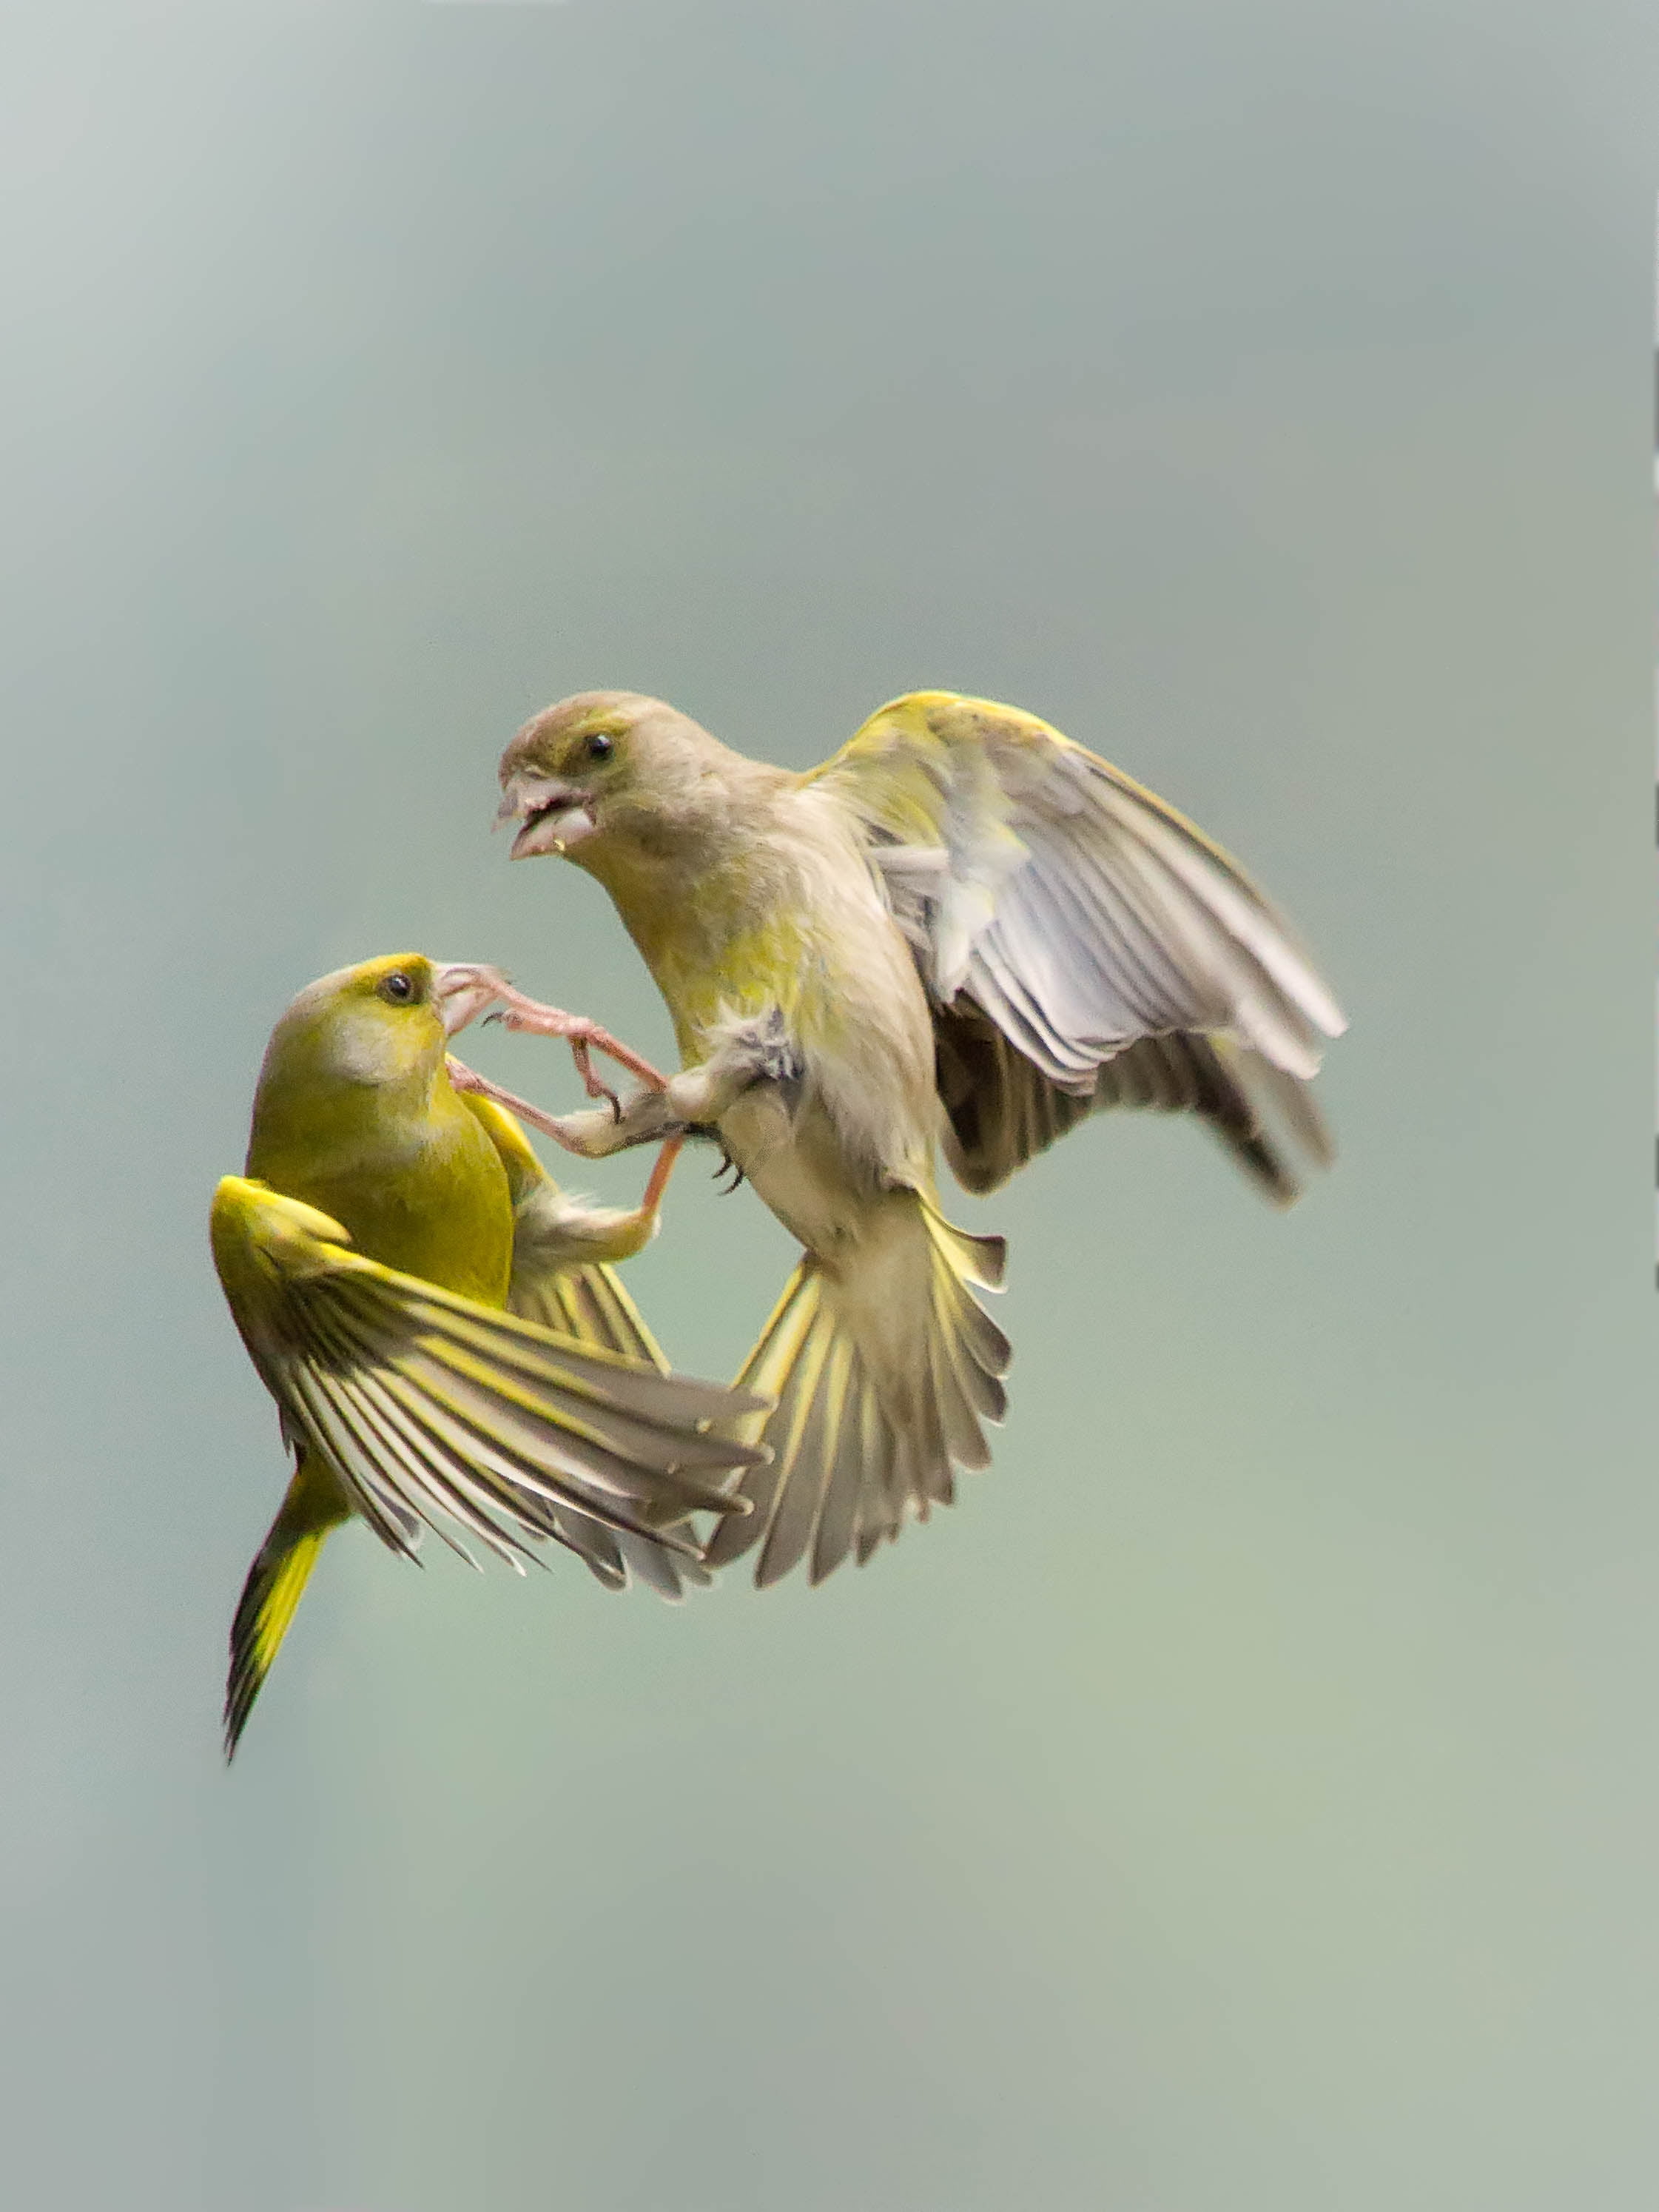 Two Canary Birds Fighting , HD Wallpaper & Backgrounds